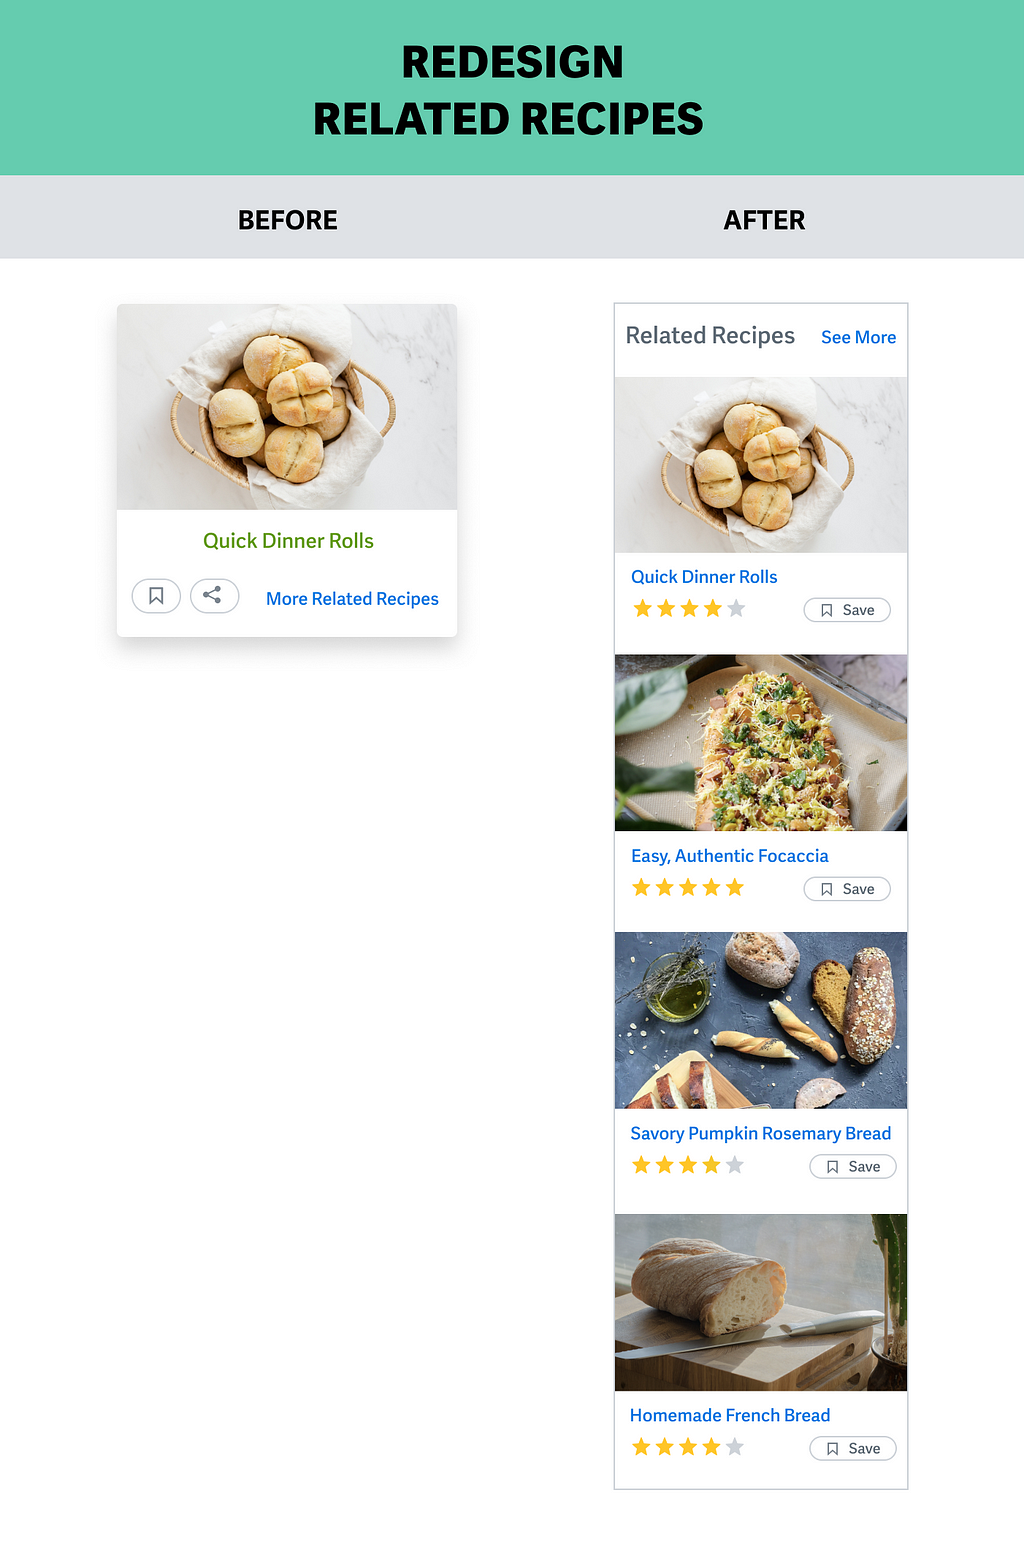 Original section with 1 recipe and an expanded version containing 4 recipes